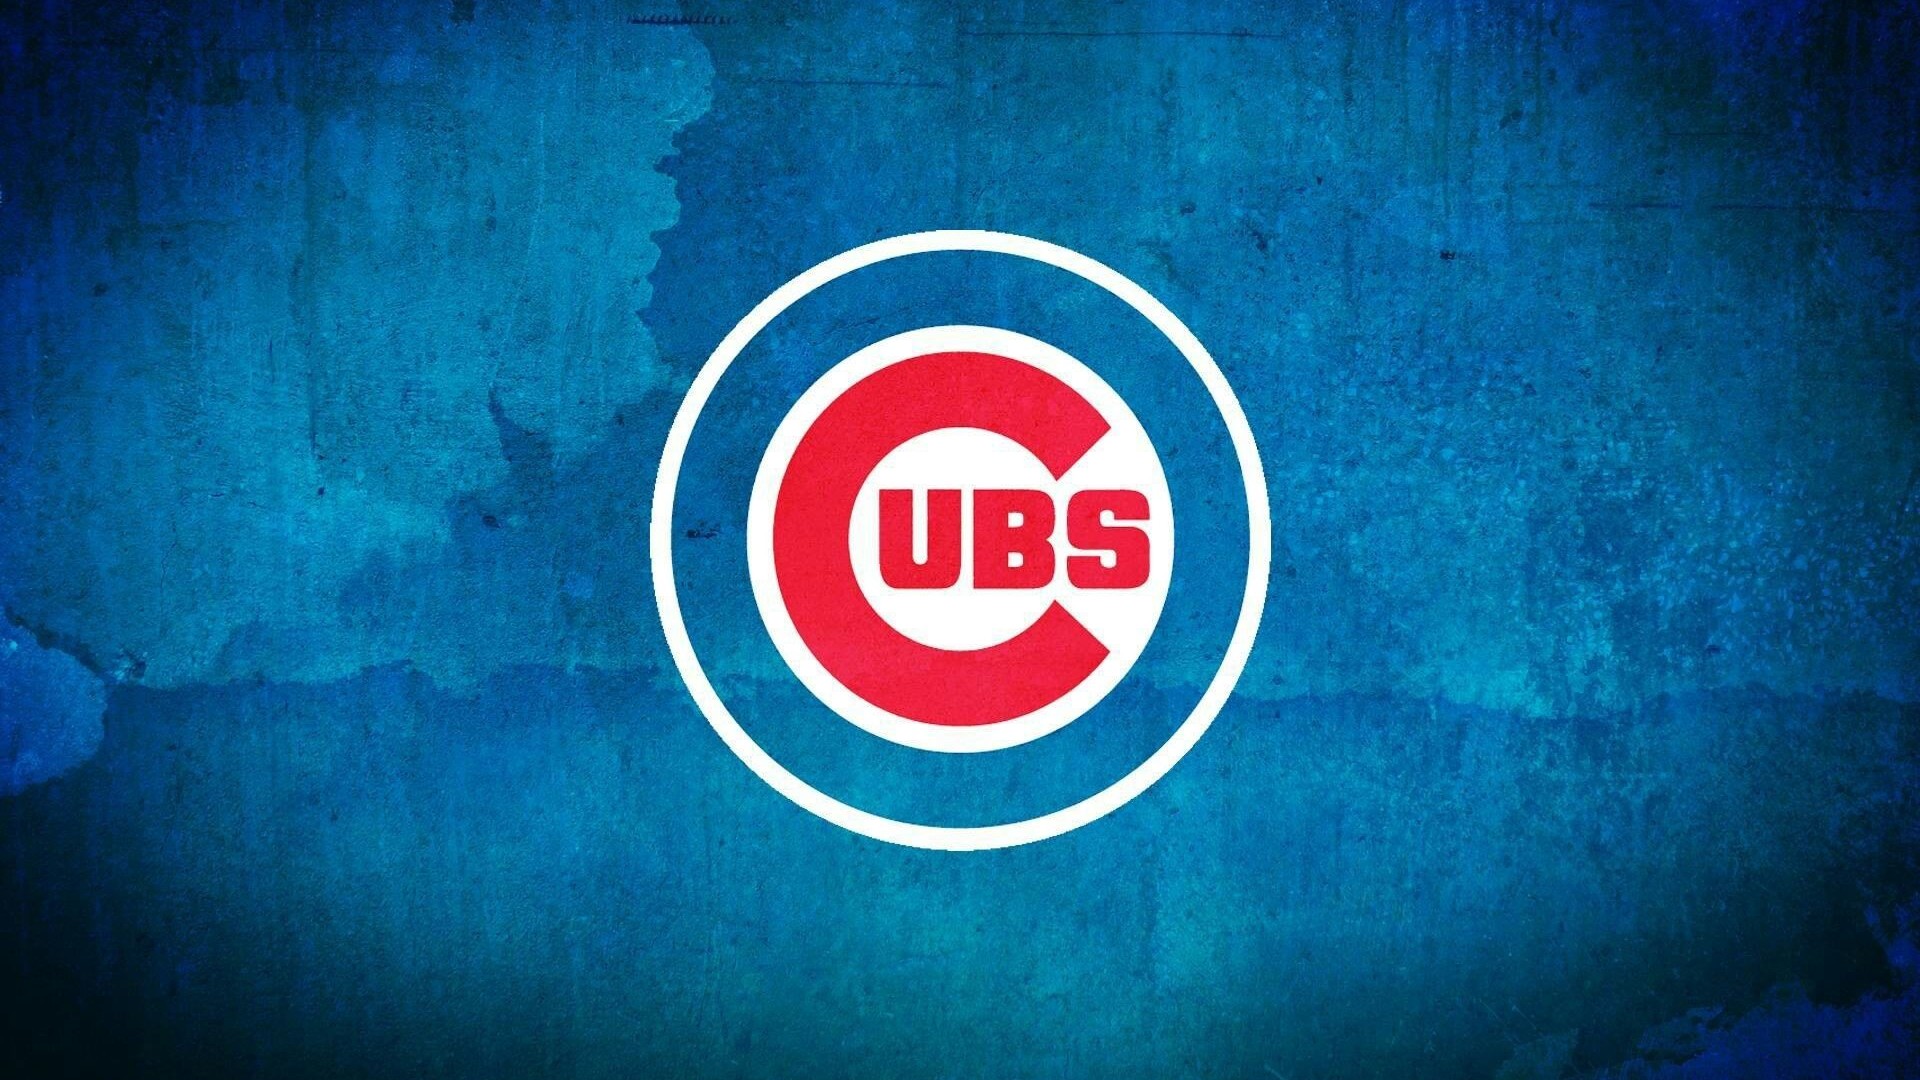 Chicago Cubs Laptop Wallpaper With high-resolution 1920X1080 pixel. You can use this wallpaper for Mac Desktop Wallpaper, Laptop Screensavers, Android Wallpapers, Tablet or iPhone Home Screen and another mobile phone device